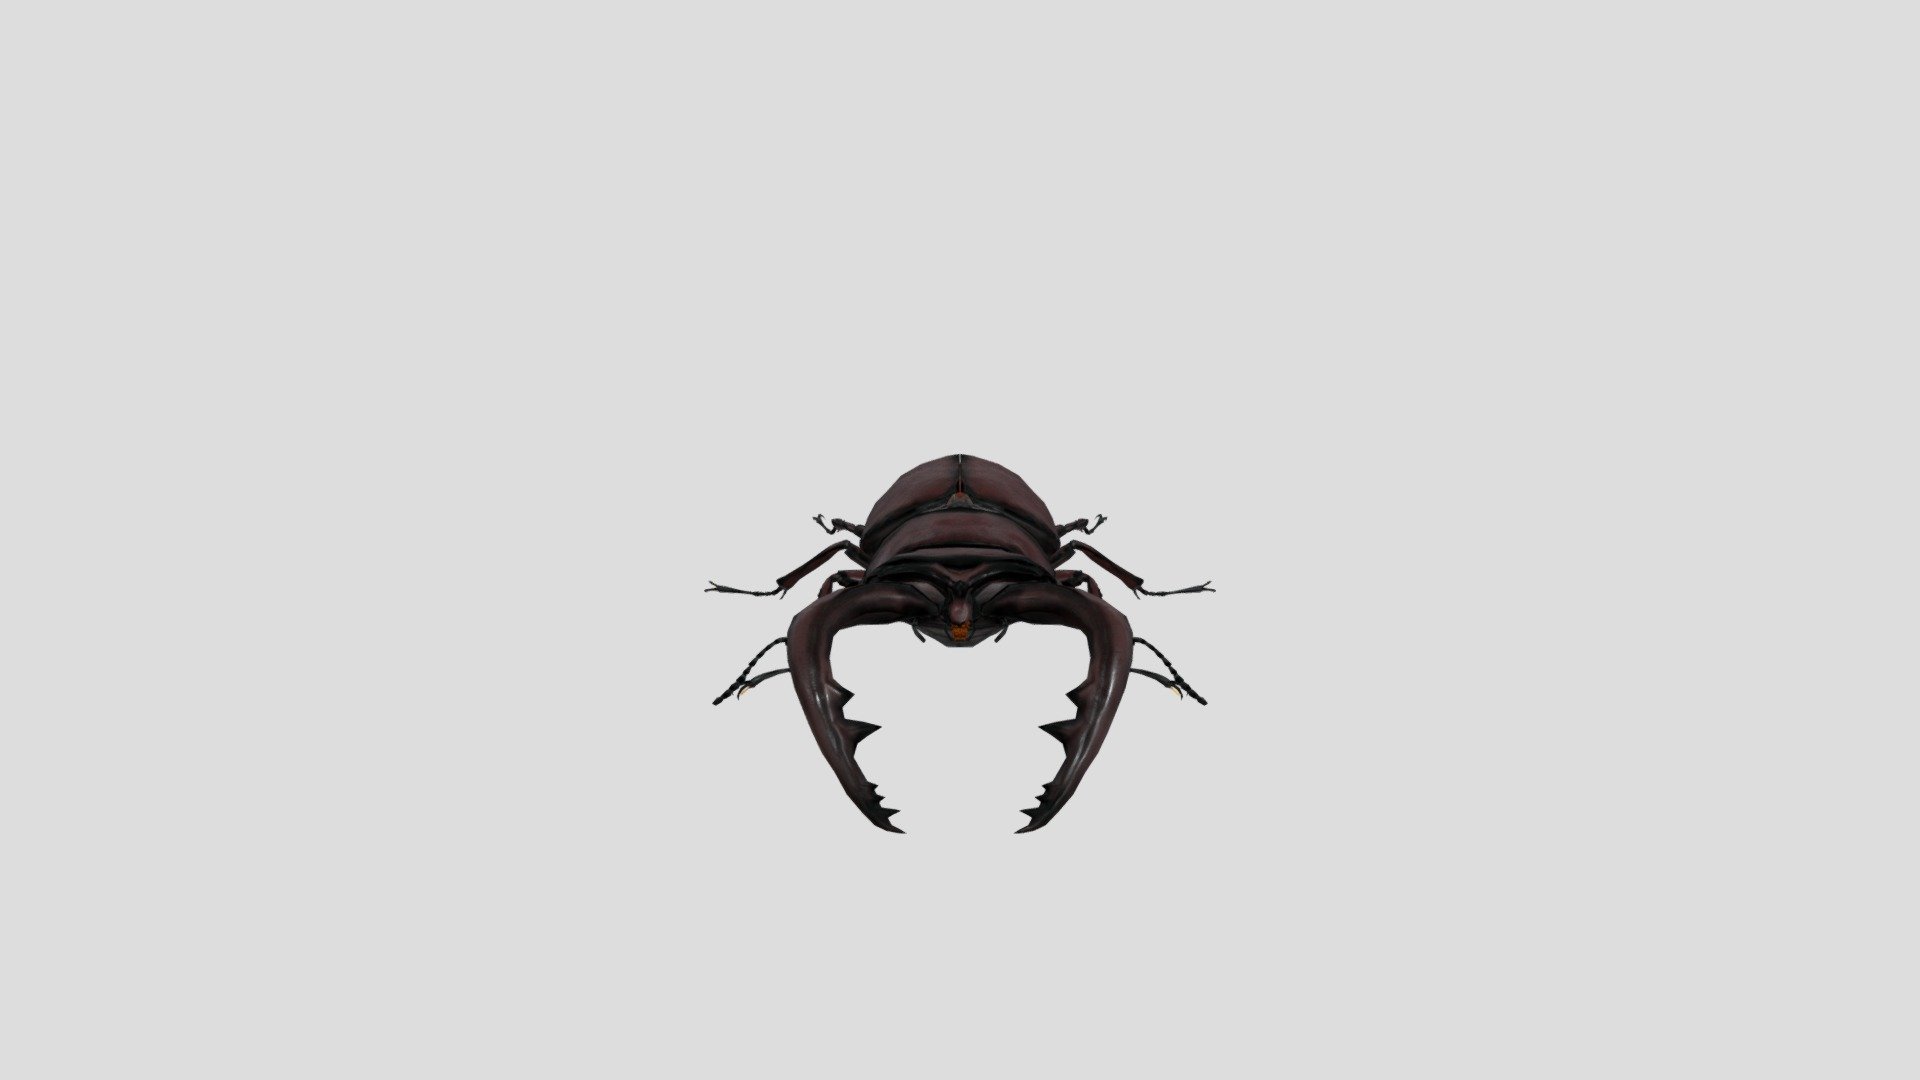 Stag beetle insect realistic animal pets animated rigged - Stag beetle - 3D model by Phil3D (@philosophie) 3d model